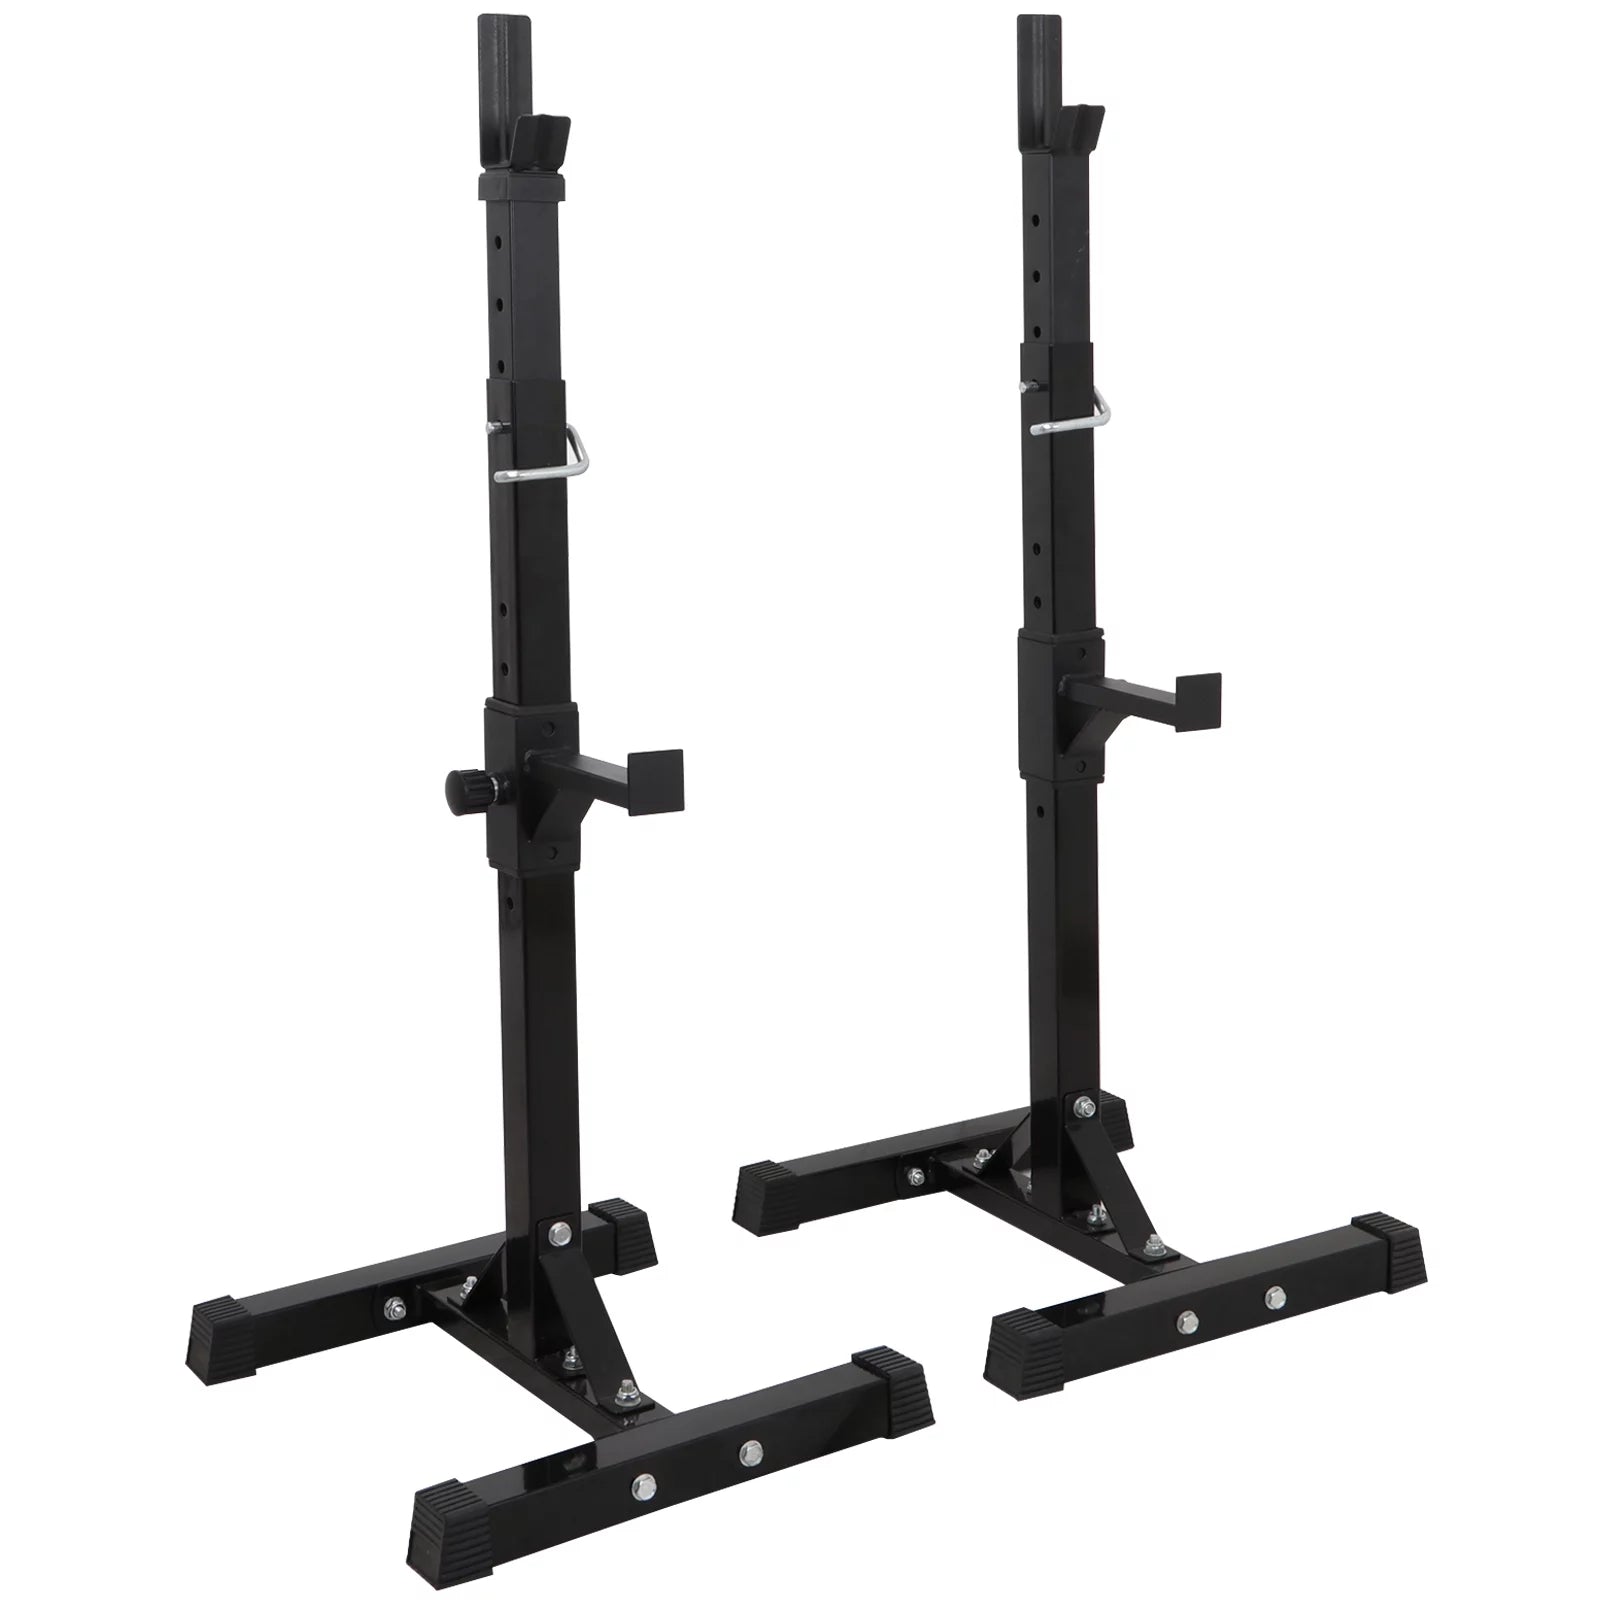 ZENY Pair of Adjustable Barbell Rack Stand Squat Bench Press Home GYM Weightlifting Fitness Exercise